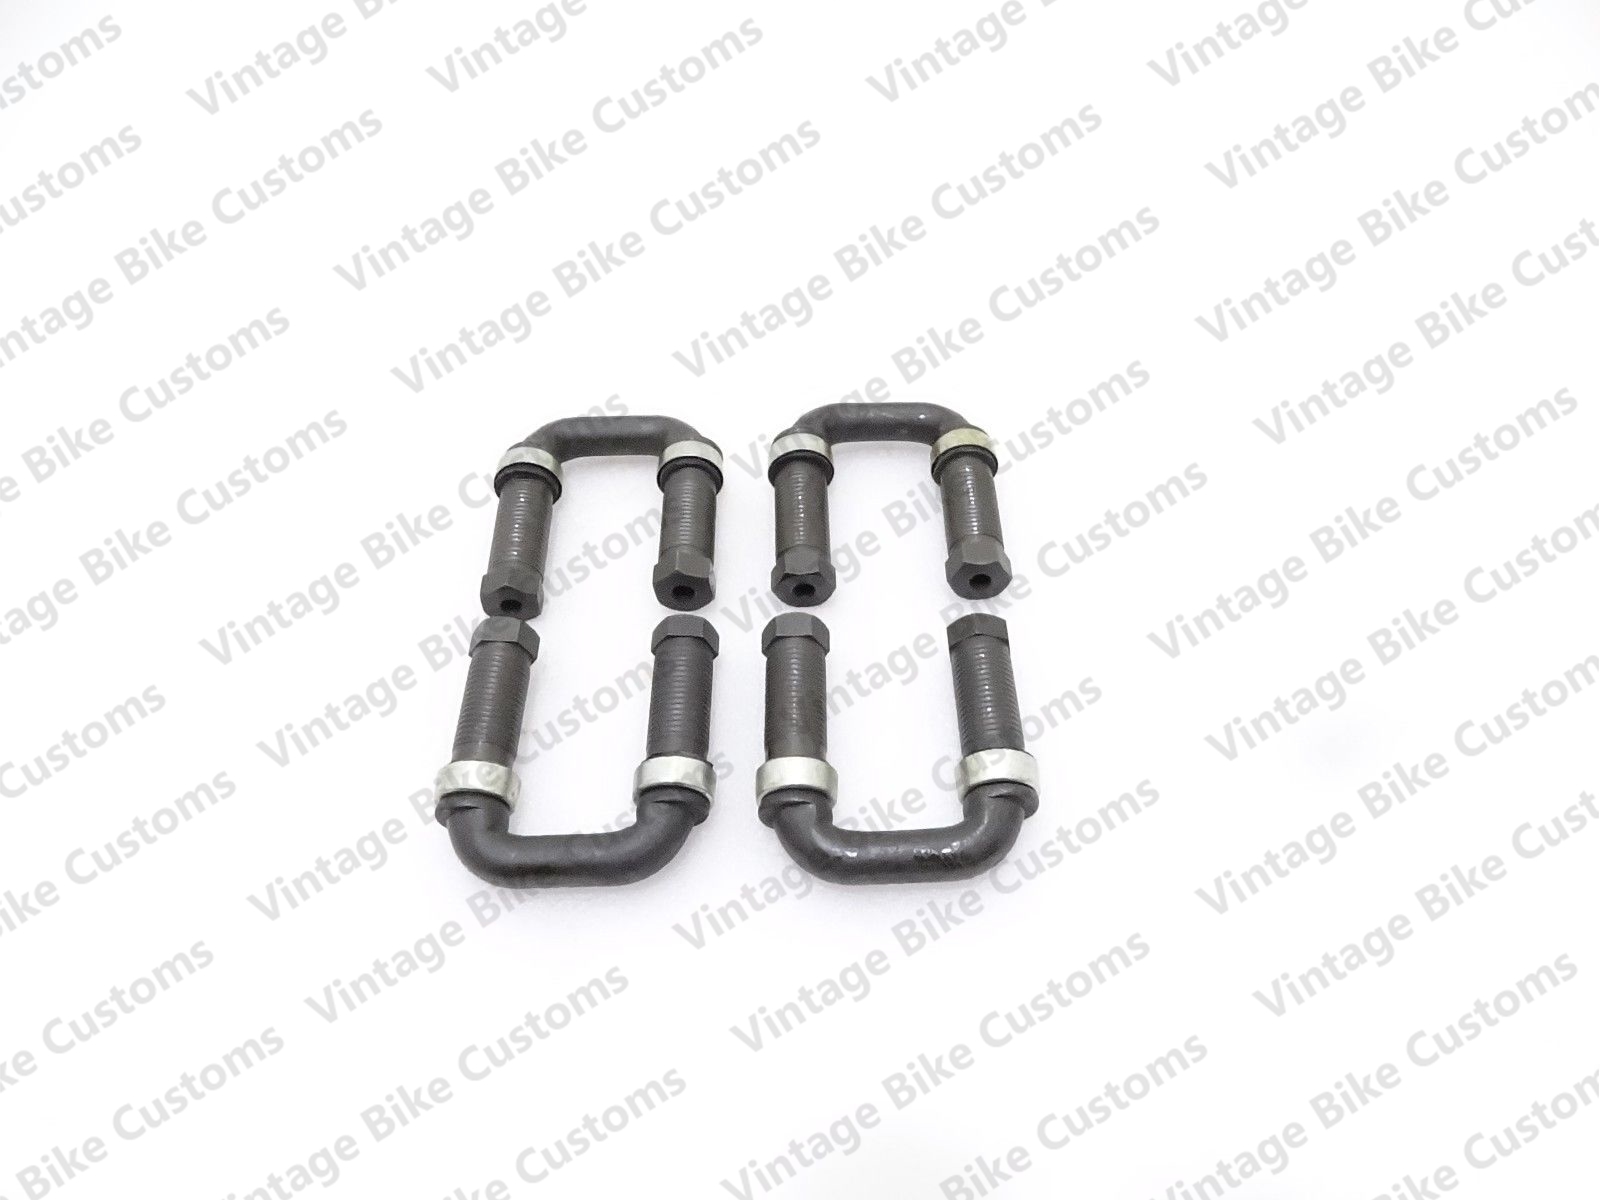 U STYLE SHACKLE RH THREAD FOR WILLYS JEEP 1941-57 # 802062 